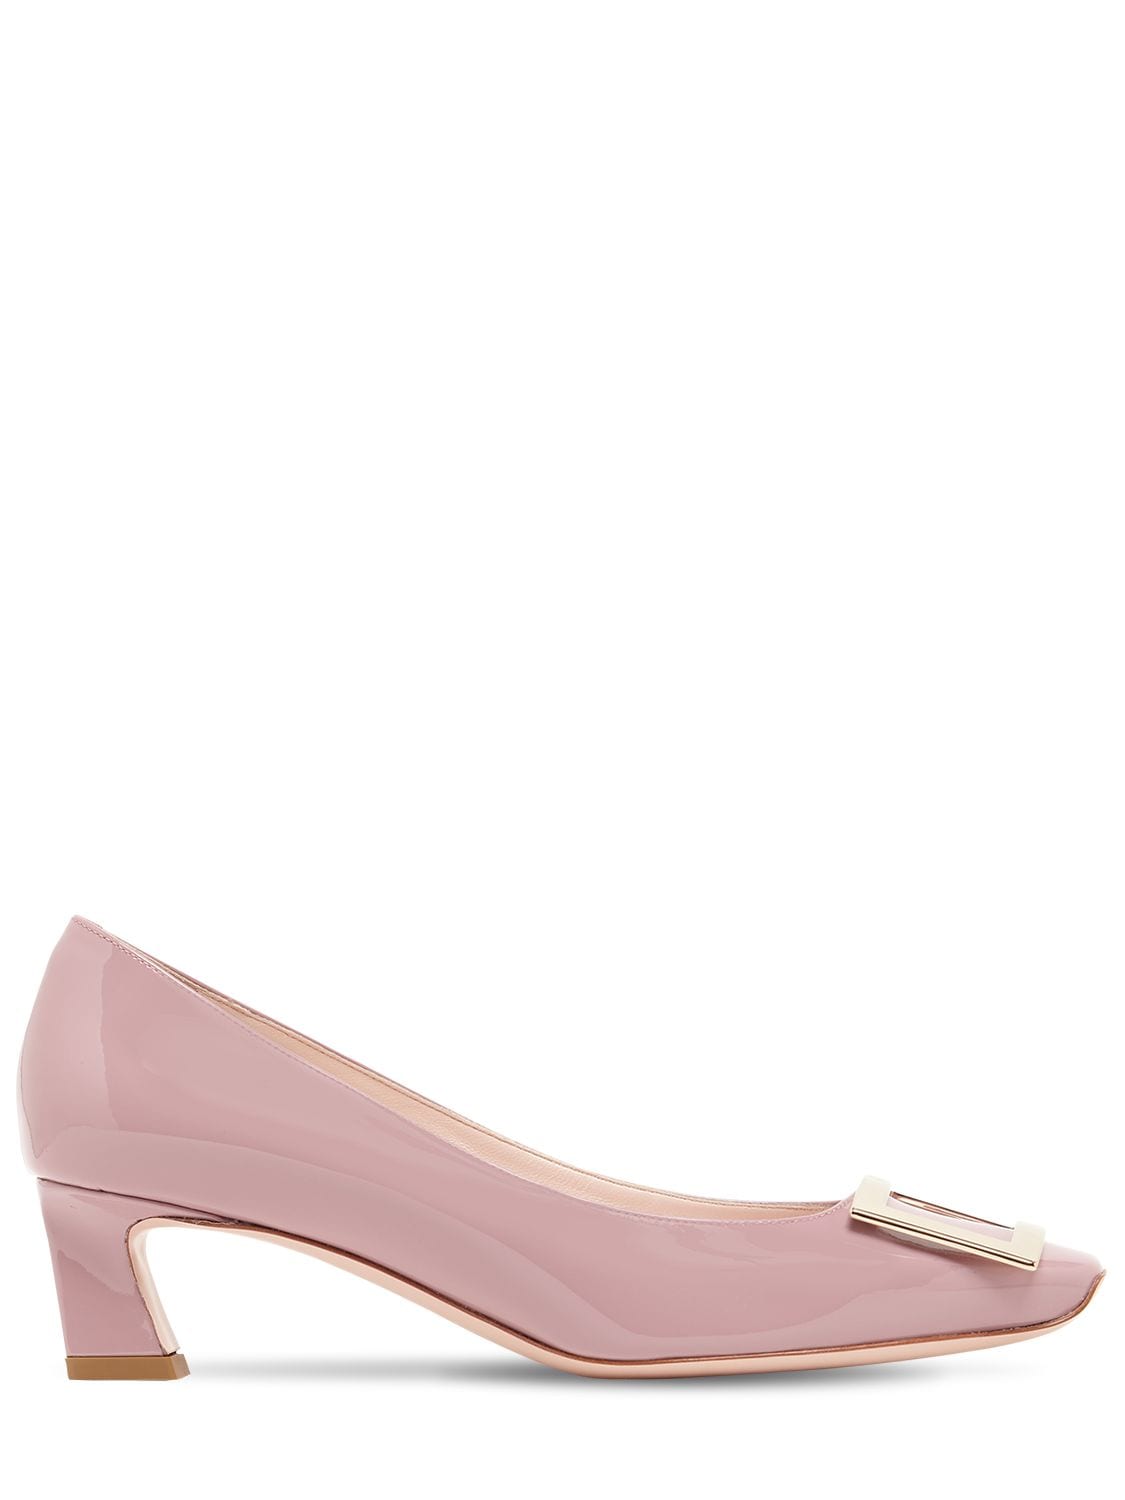 Roger Vivier 45mm Trompette Patent Leather Pumps In Rose